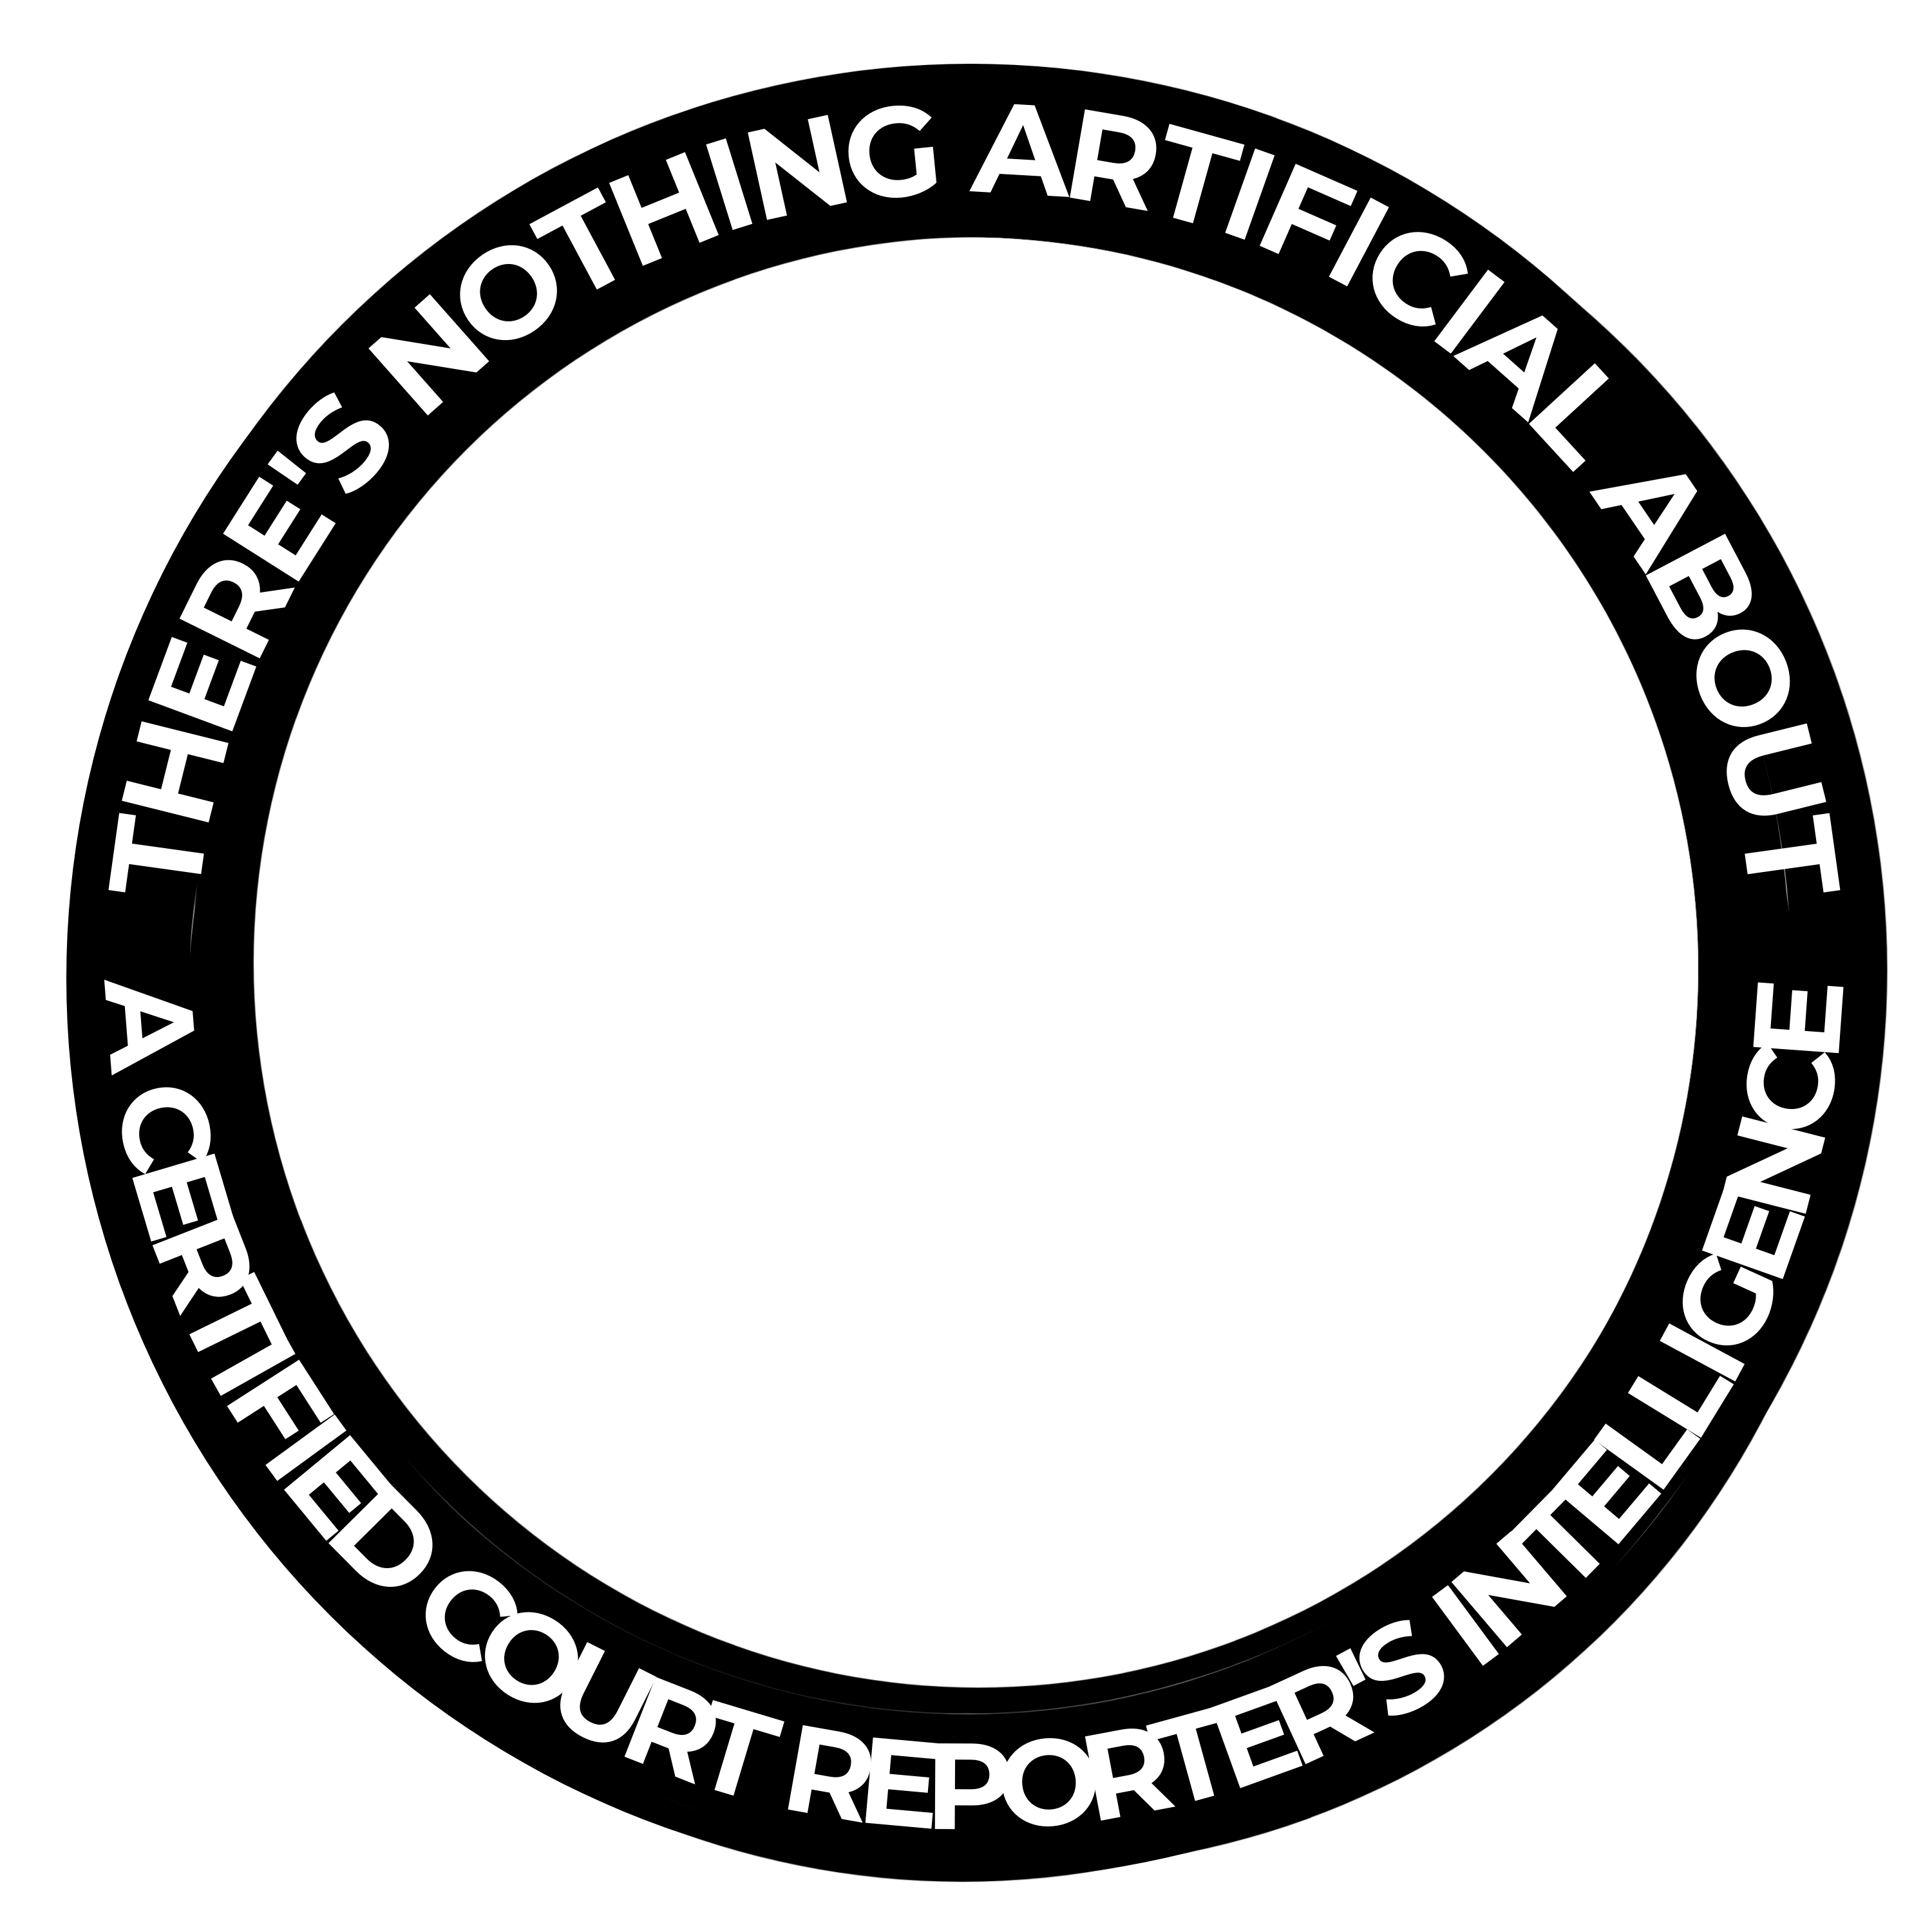 Black Circle There's Nothing Artificial about a certified court reporter's intelligence.